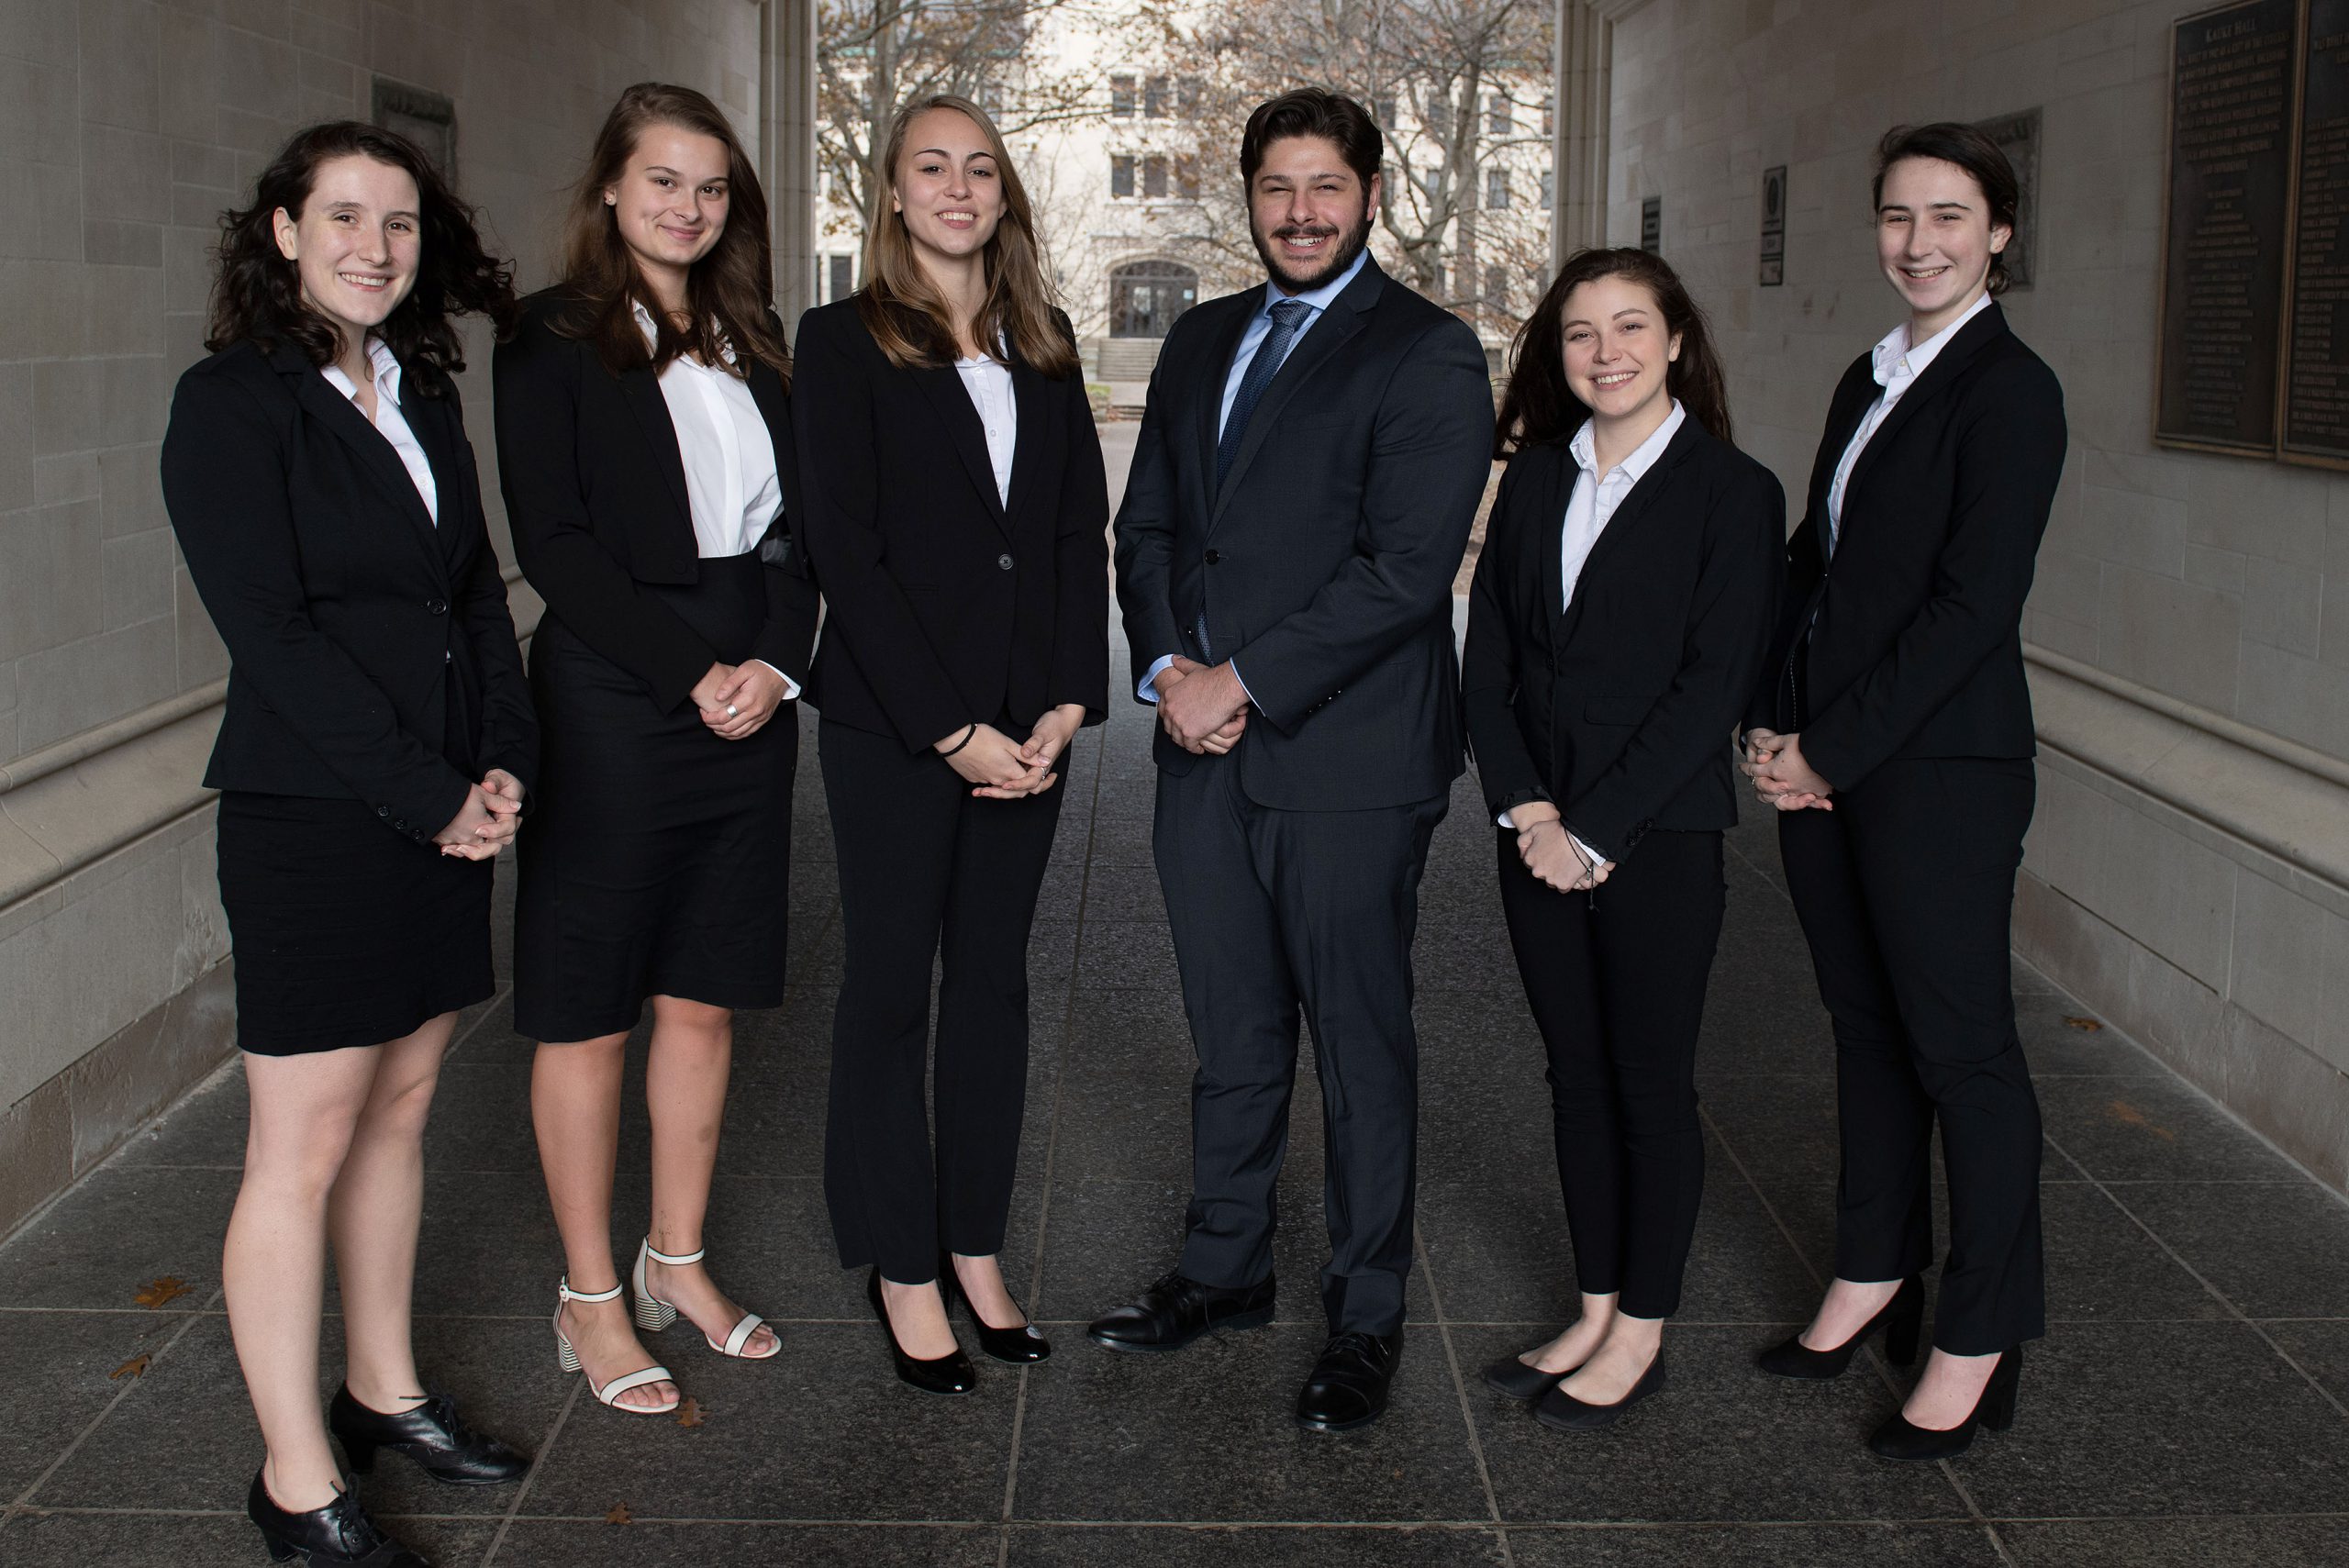 2019-20 Moot Court Team national qualifiers